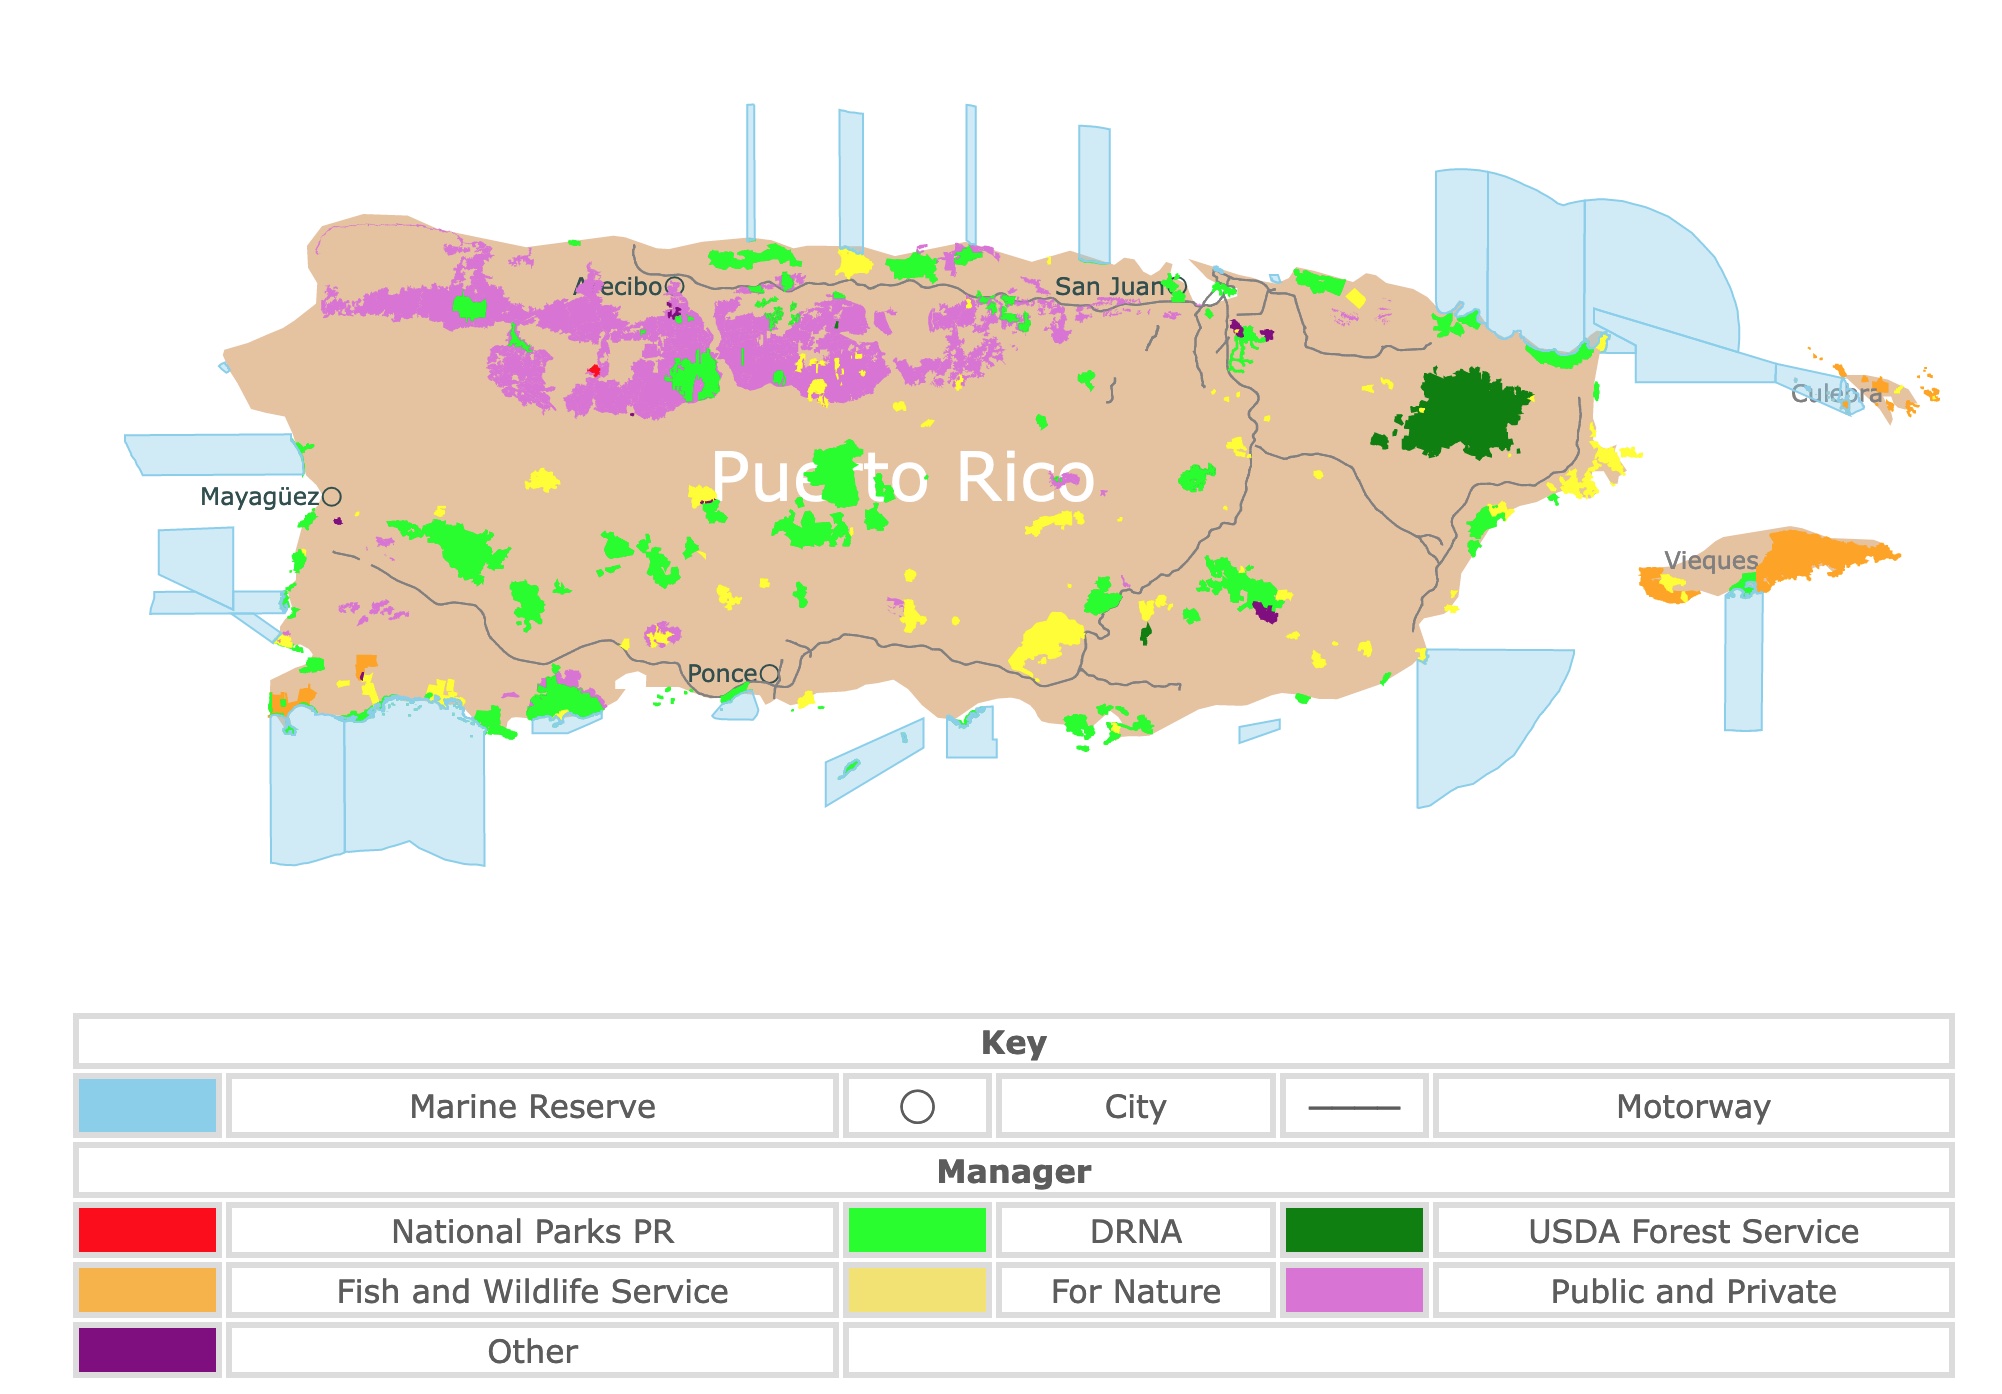 Map of Puerto Rico state parks, national parks, forests, and public lands areas